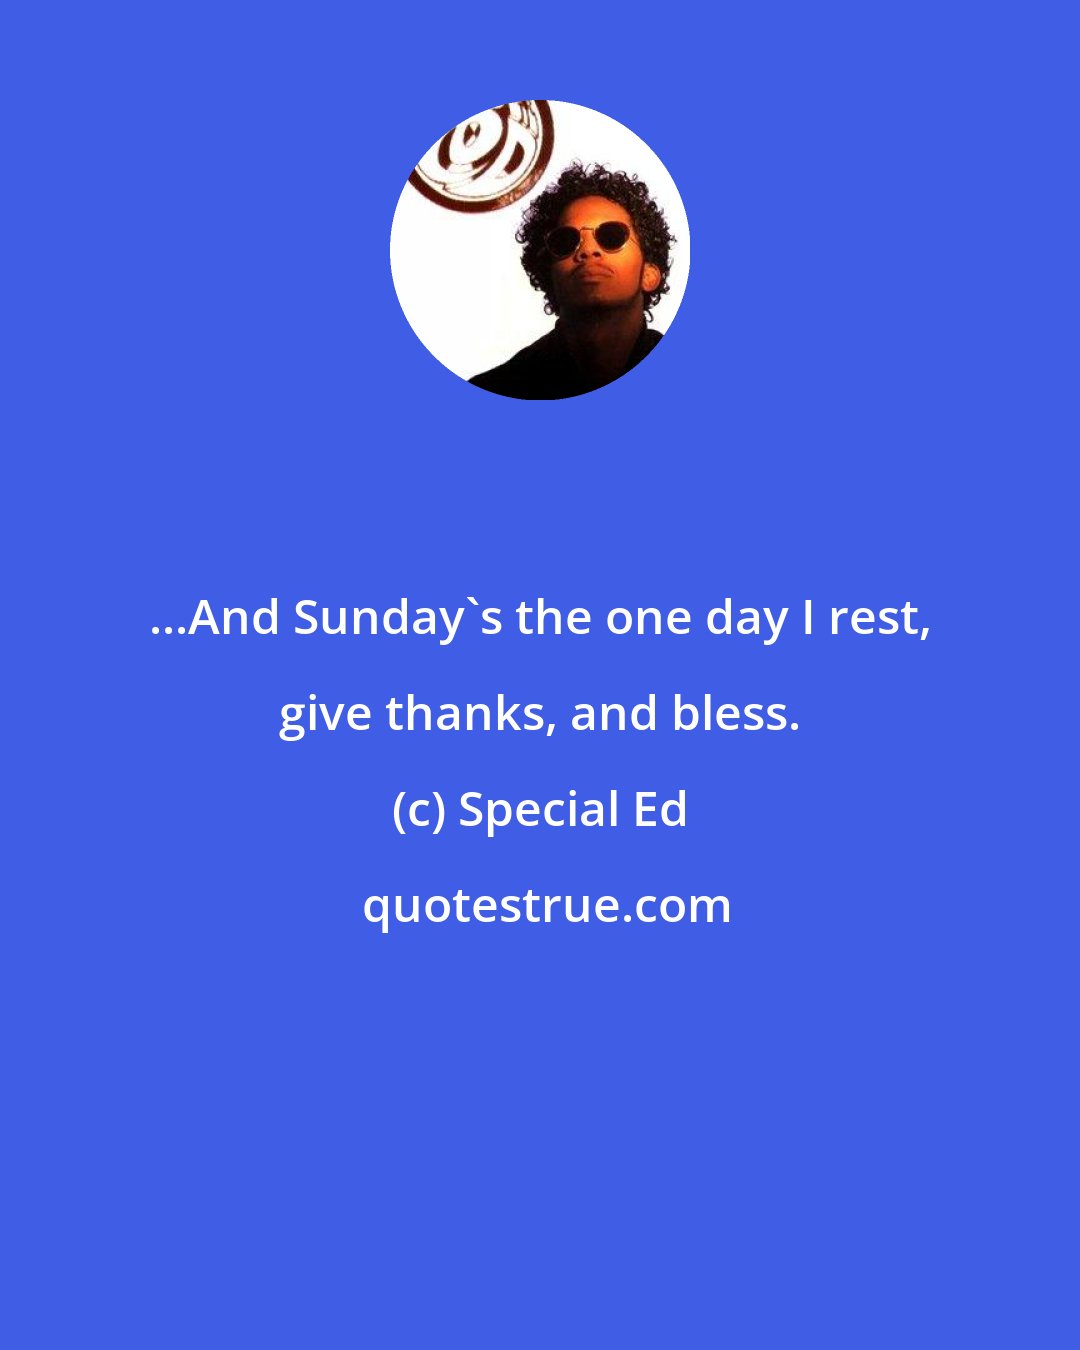 Special Ed: ...And Sunday's the one day I rest, give thanks, and bless.